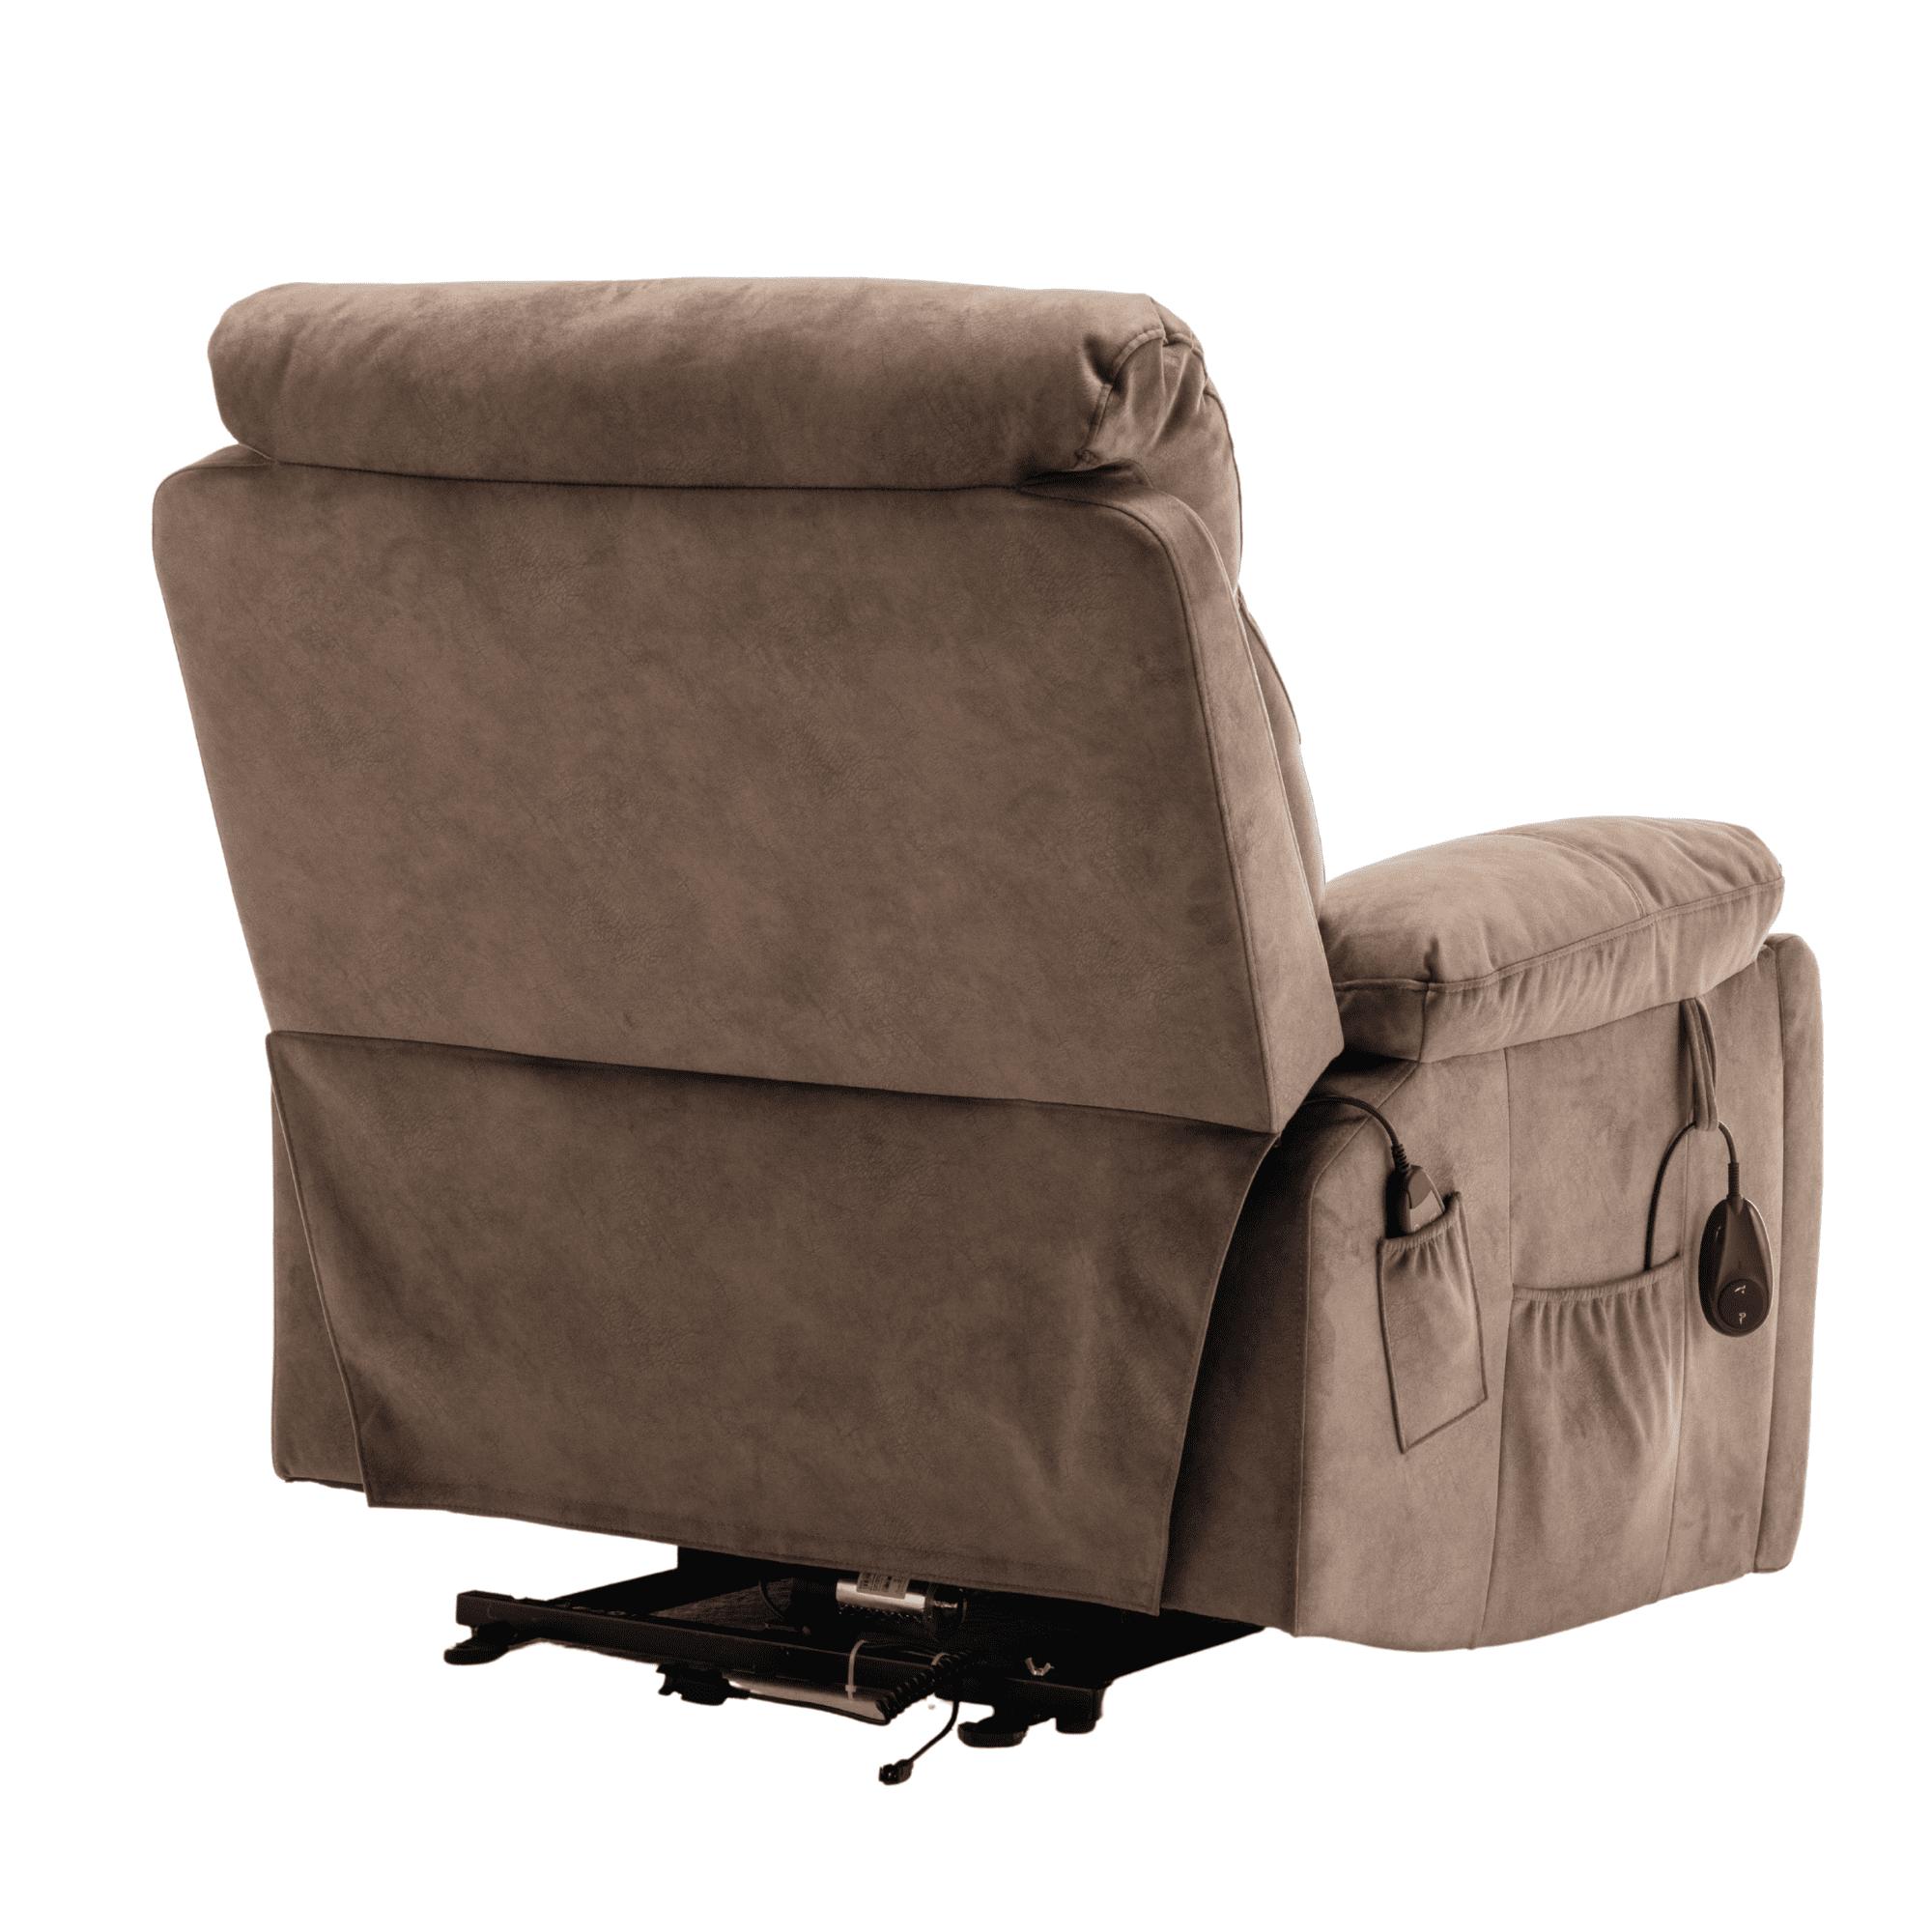 JUUXO Oversized Lift Recliner Chair, 26-inch Extra Wide Seat Big 